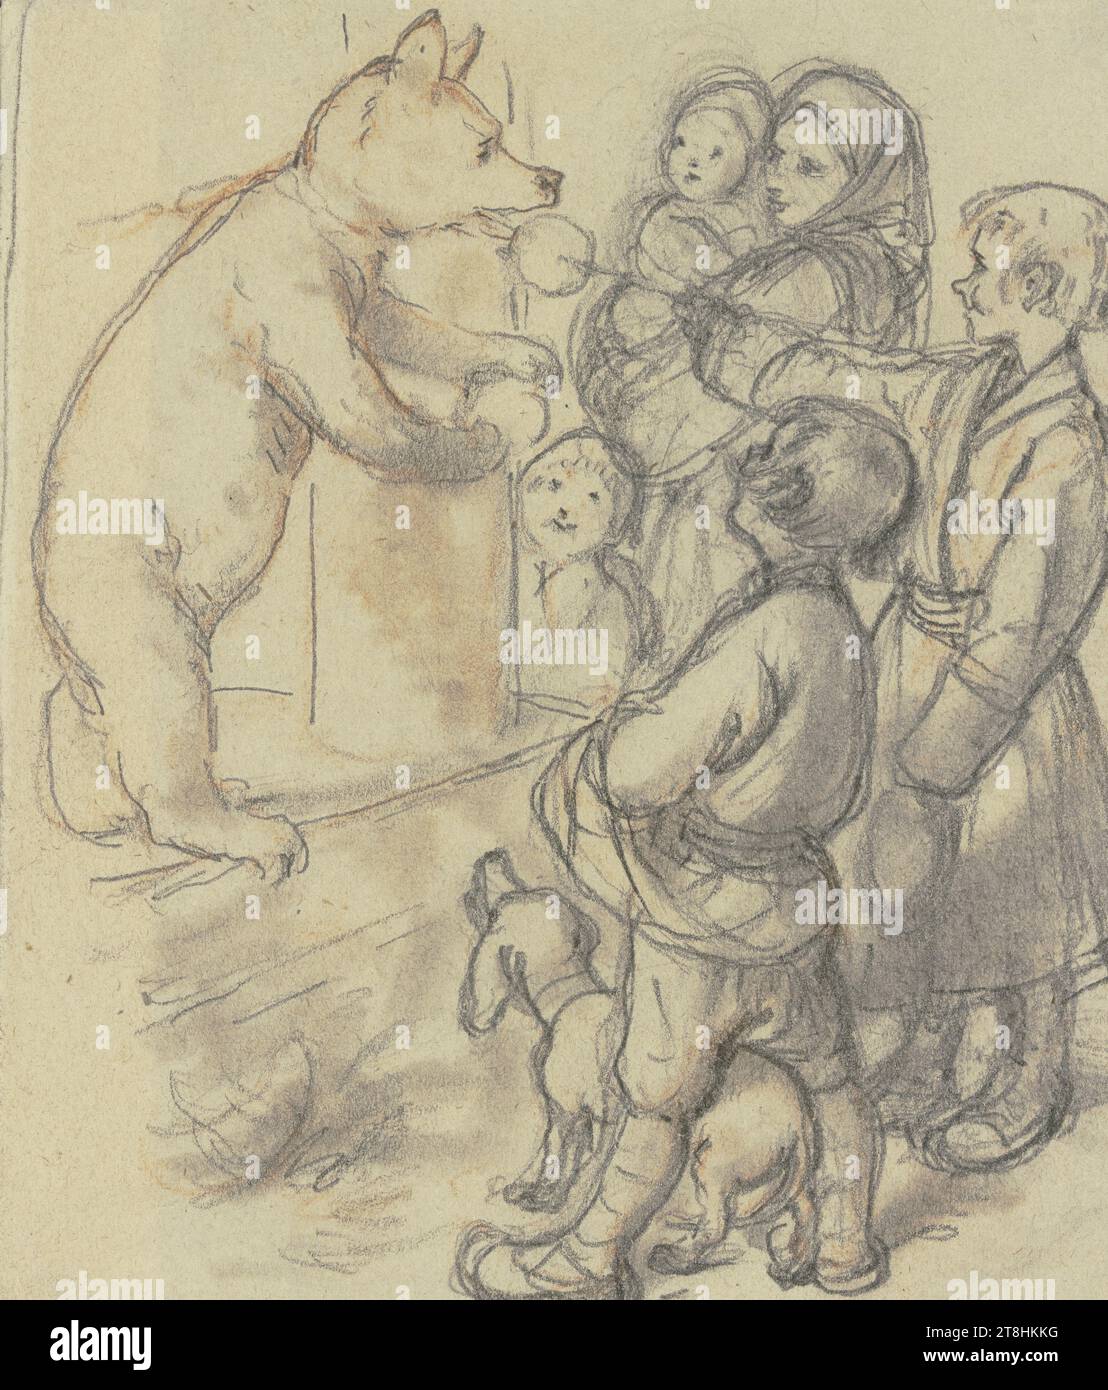 WILHELM AMANDUS BEER, children with a dancing bear, sheet, 104 x 78 mm, pencil and red chalk on paper, children with a dancing bear, WILHELM AMANDUS BEER, 19TH CENTURY, DRAWING, pencil and red chalk on paper, GRAPHITE-CLAY MIXTURE, RED COLOR, PAPER, PENCIL DRAWING, RED CELL DRAWING, GERMAN, FIGURE STUDY, ANIMAL STUDY, COMPOSITION STUDY, verso estate stamp Wilhelm Amandus Beer, Frankfurt am Main, Frankfurt am Main Stock Photo